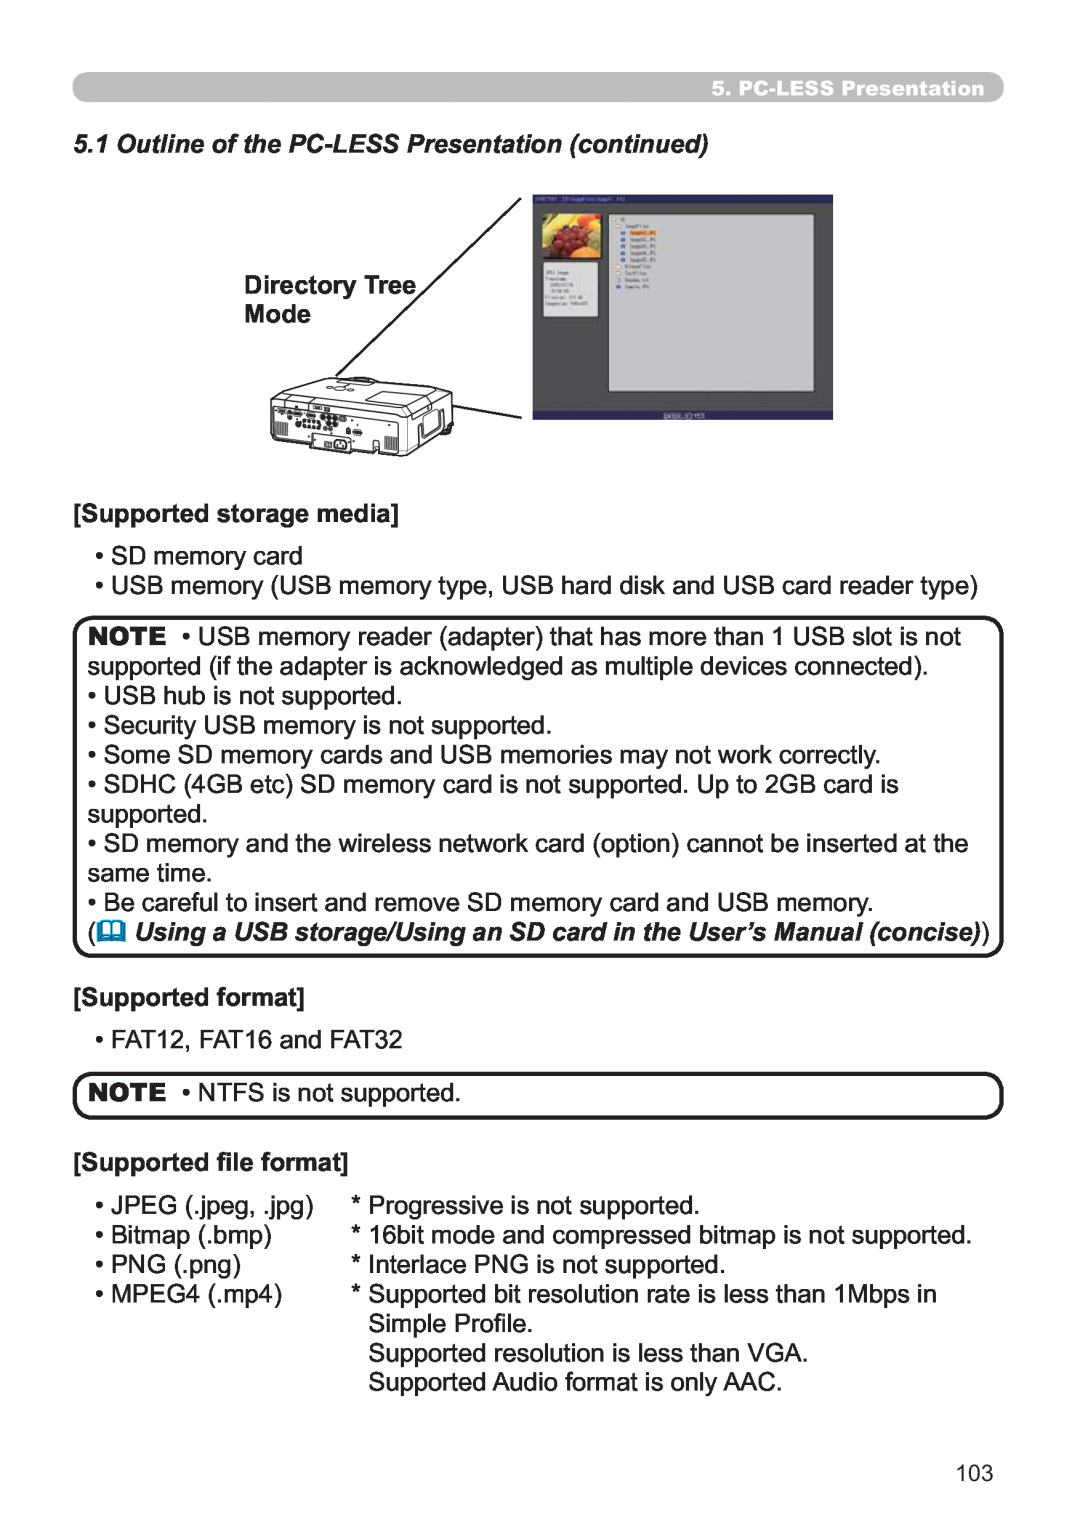 Hitachi CP-X809W Outline of the PC-LESS Presentation continued, Supported storage media, ‡6PHPRU\FDUG, Vxssruwhg 